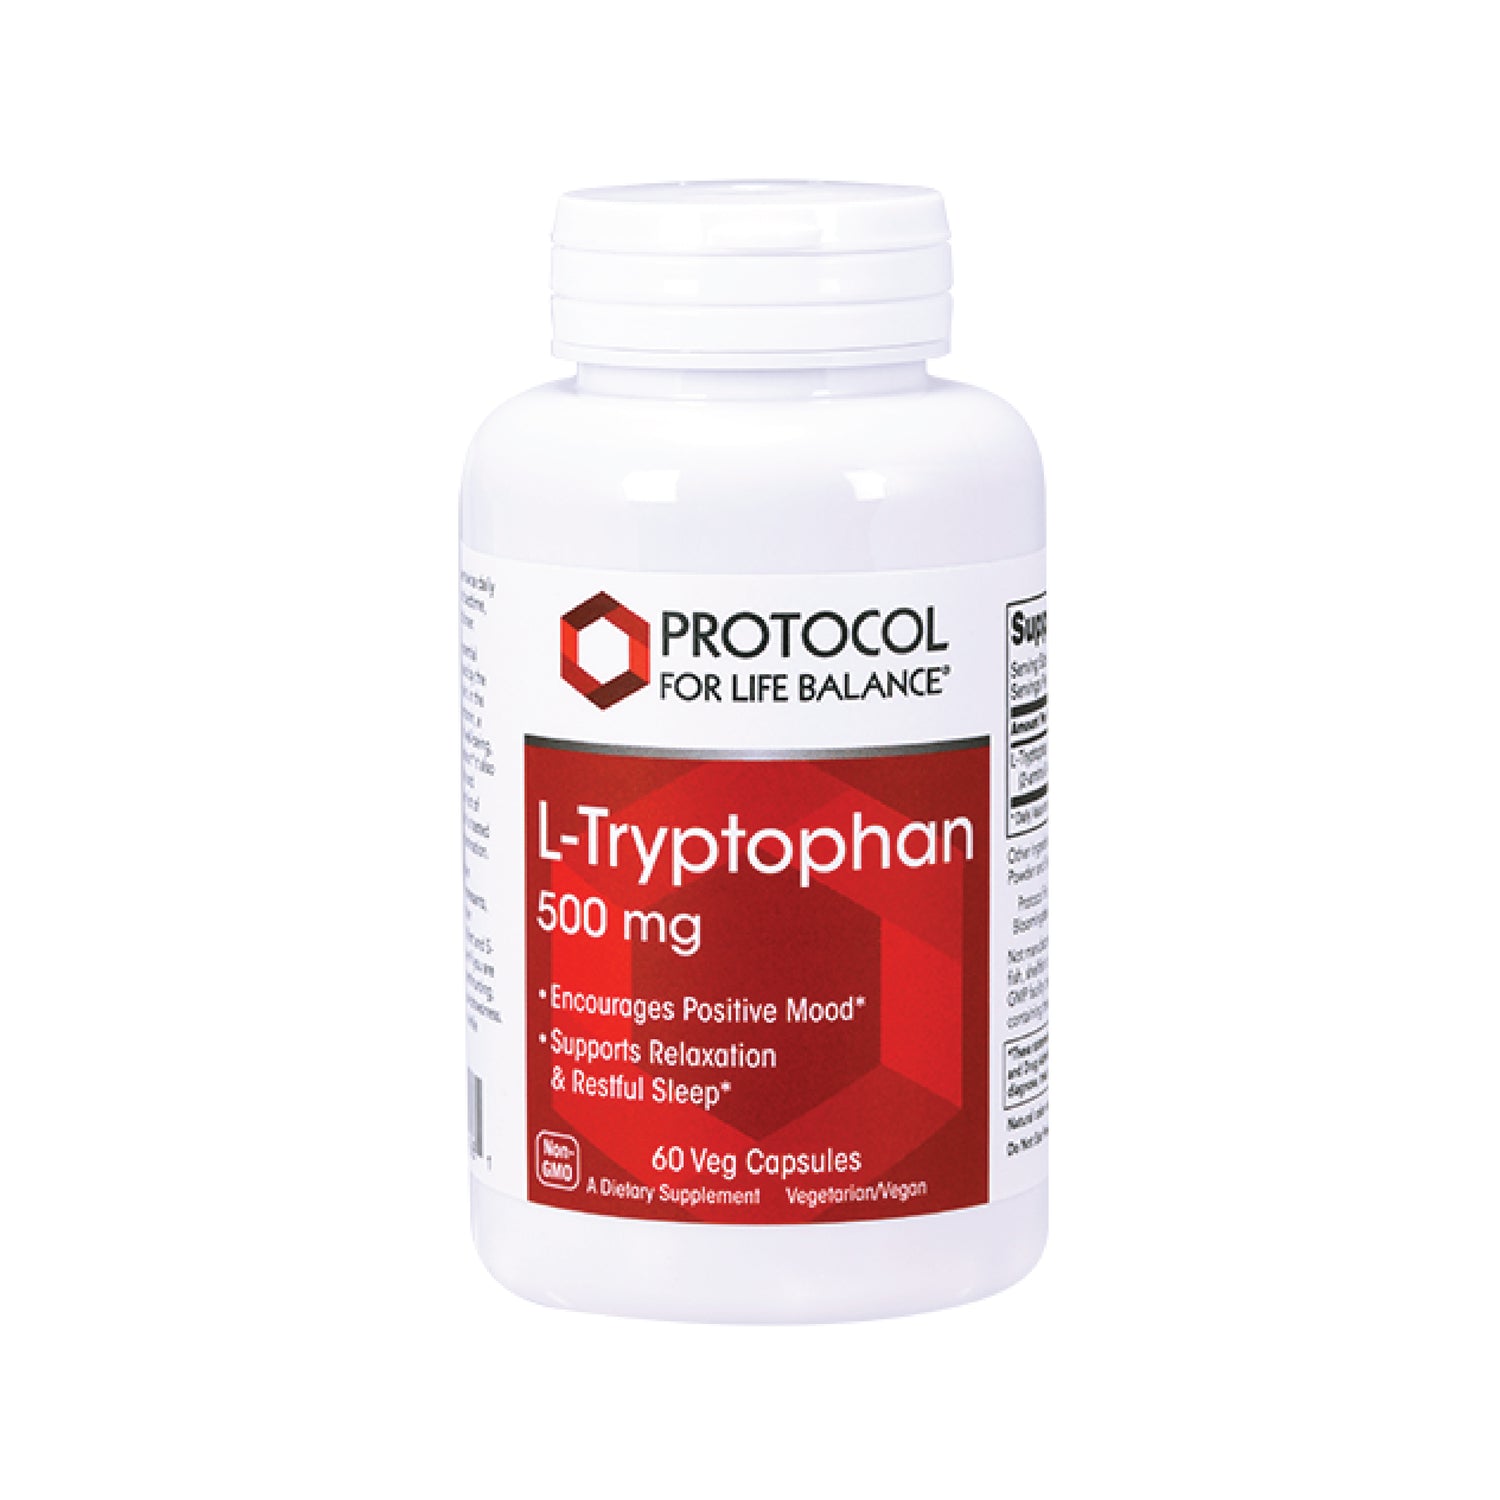 Protocol for Life Balance, L-Tryptophan, 500 mg, 60 Veg Capsules - Bloom Concept